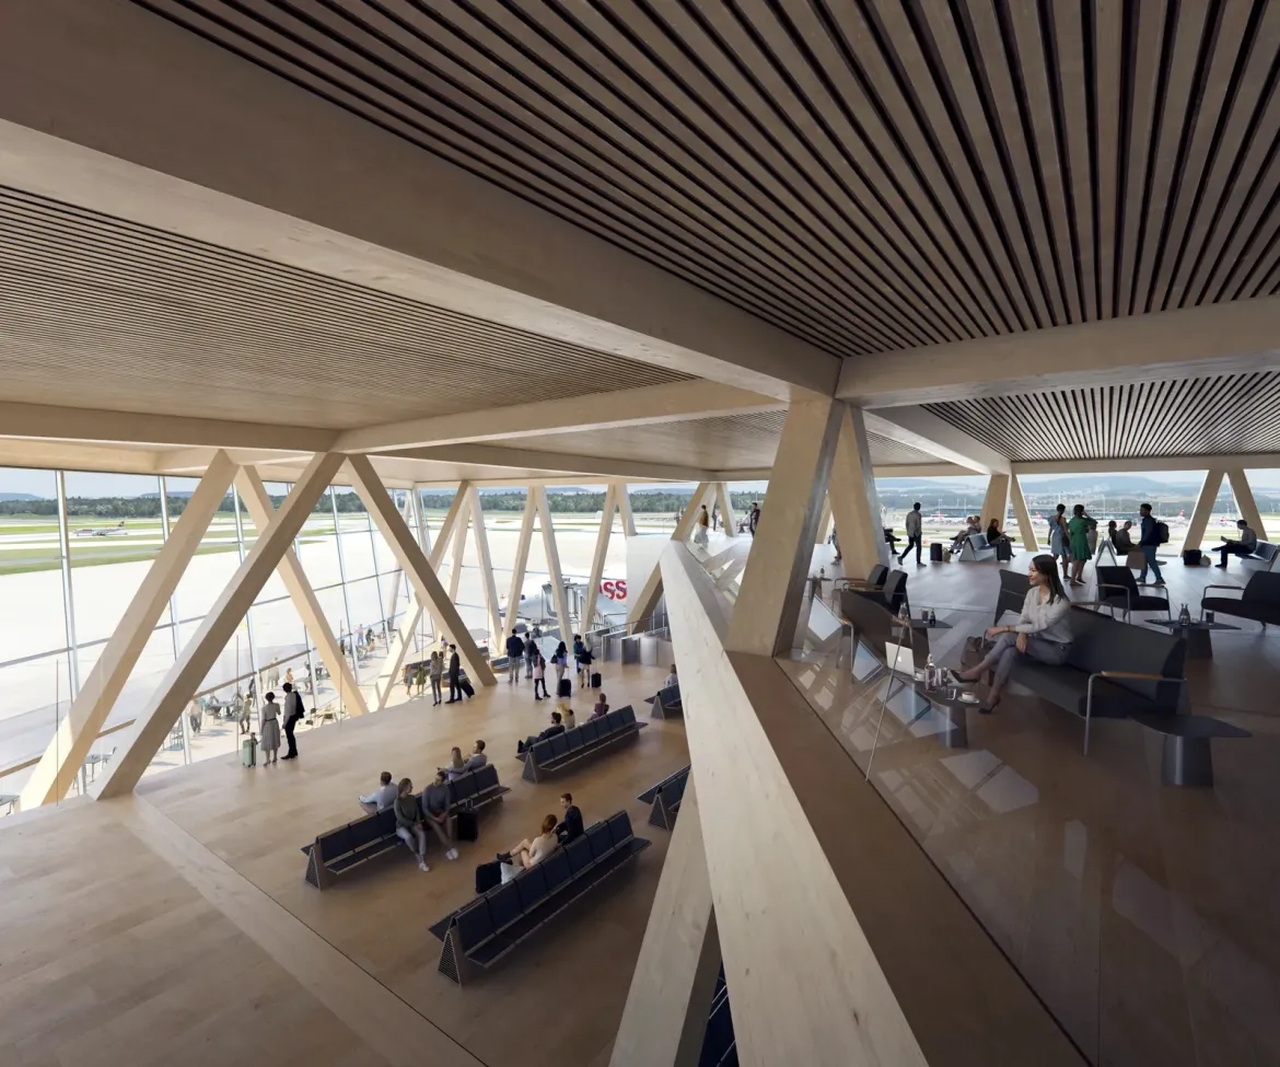 Airport Terminal Made of Wood to be Built in Zurich